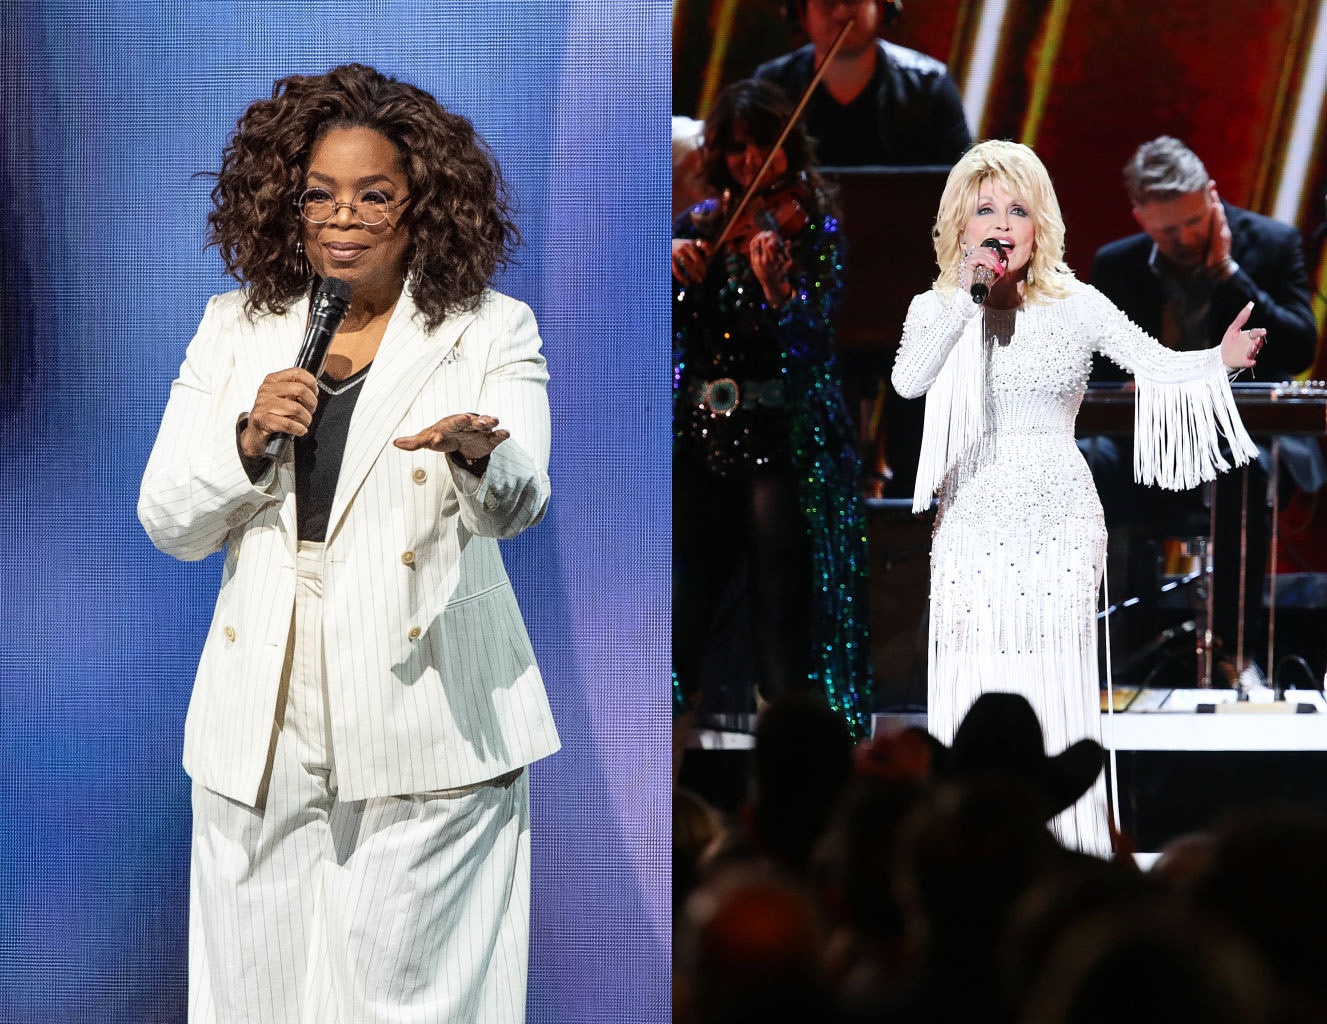 Oprah Winfrey's Inappropriate Dolly Parton Interview Gone Viral - Here's Why